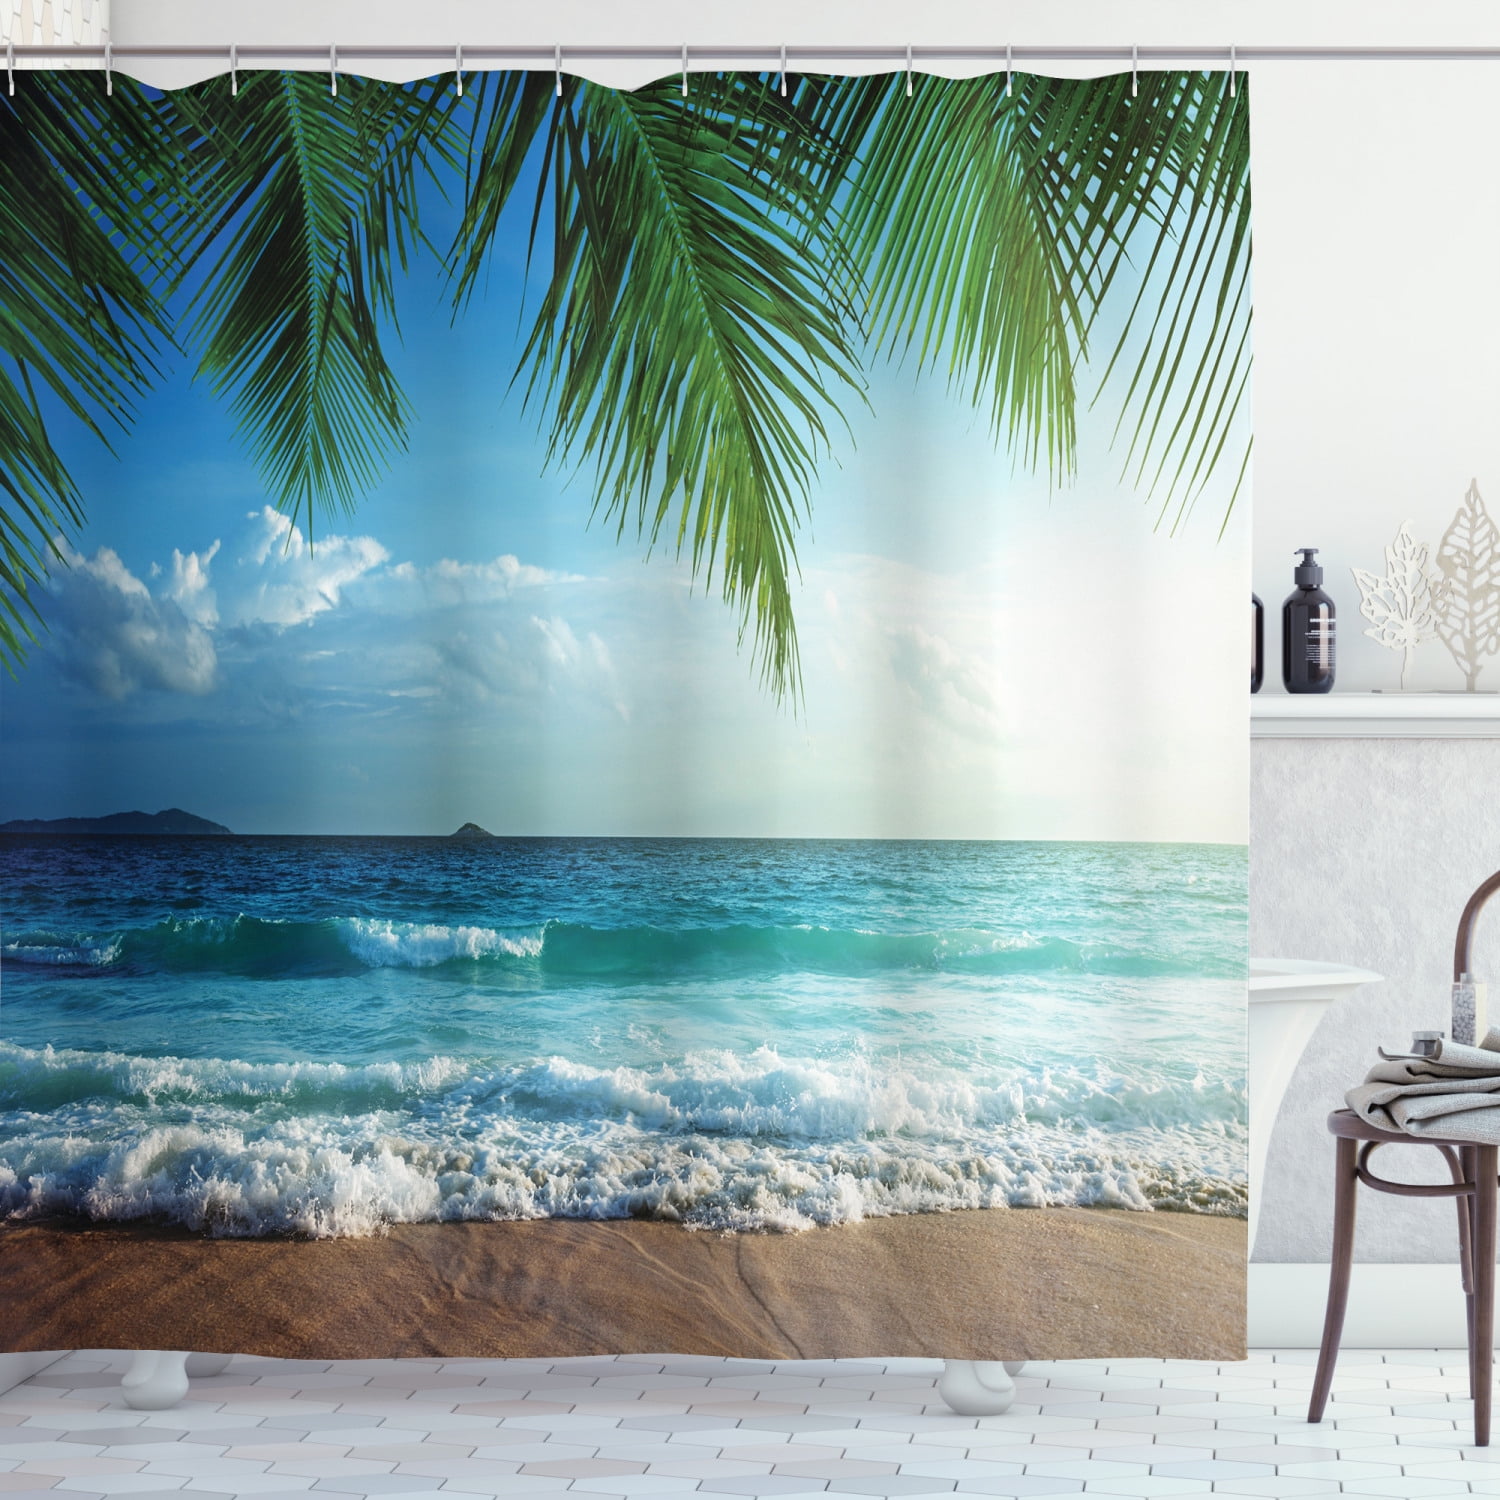 72" Waterproof Fabric Shower Curtain Set Hand Drawn Tropical Palm Trees Surfing 